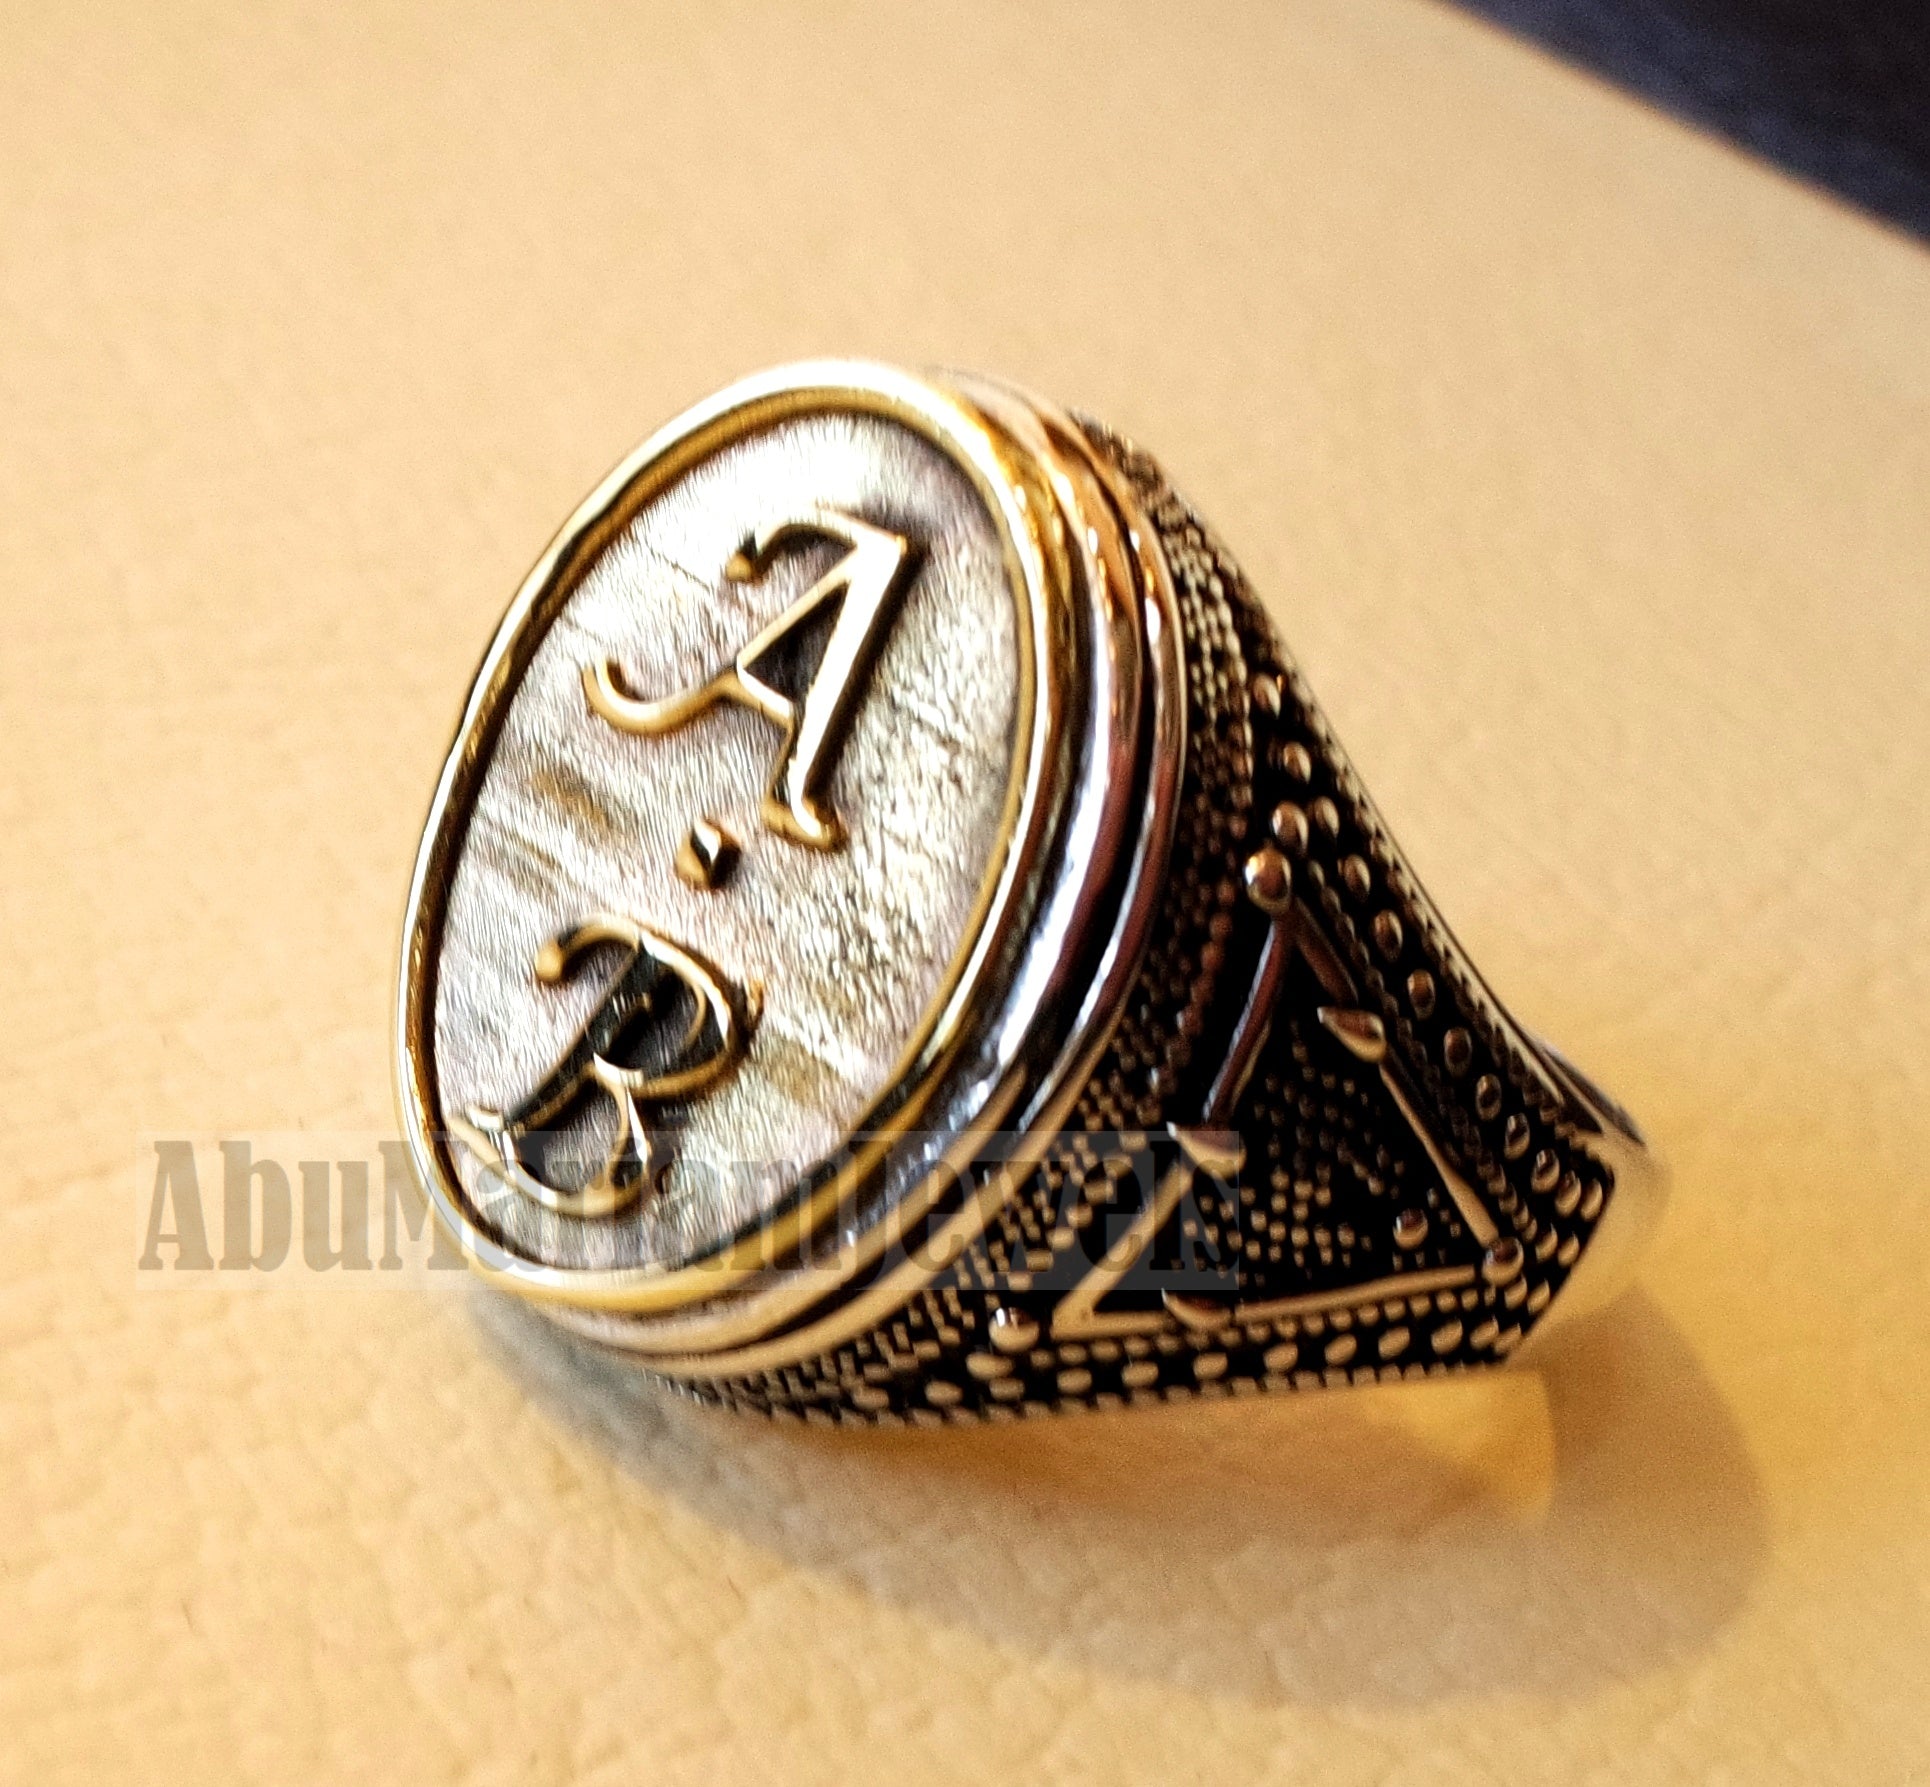 Initials Customized men ring personalized any 2 letters antique jewelry style sterling silver 925 and bronze any size In-1003